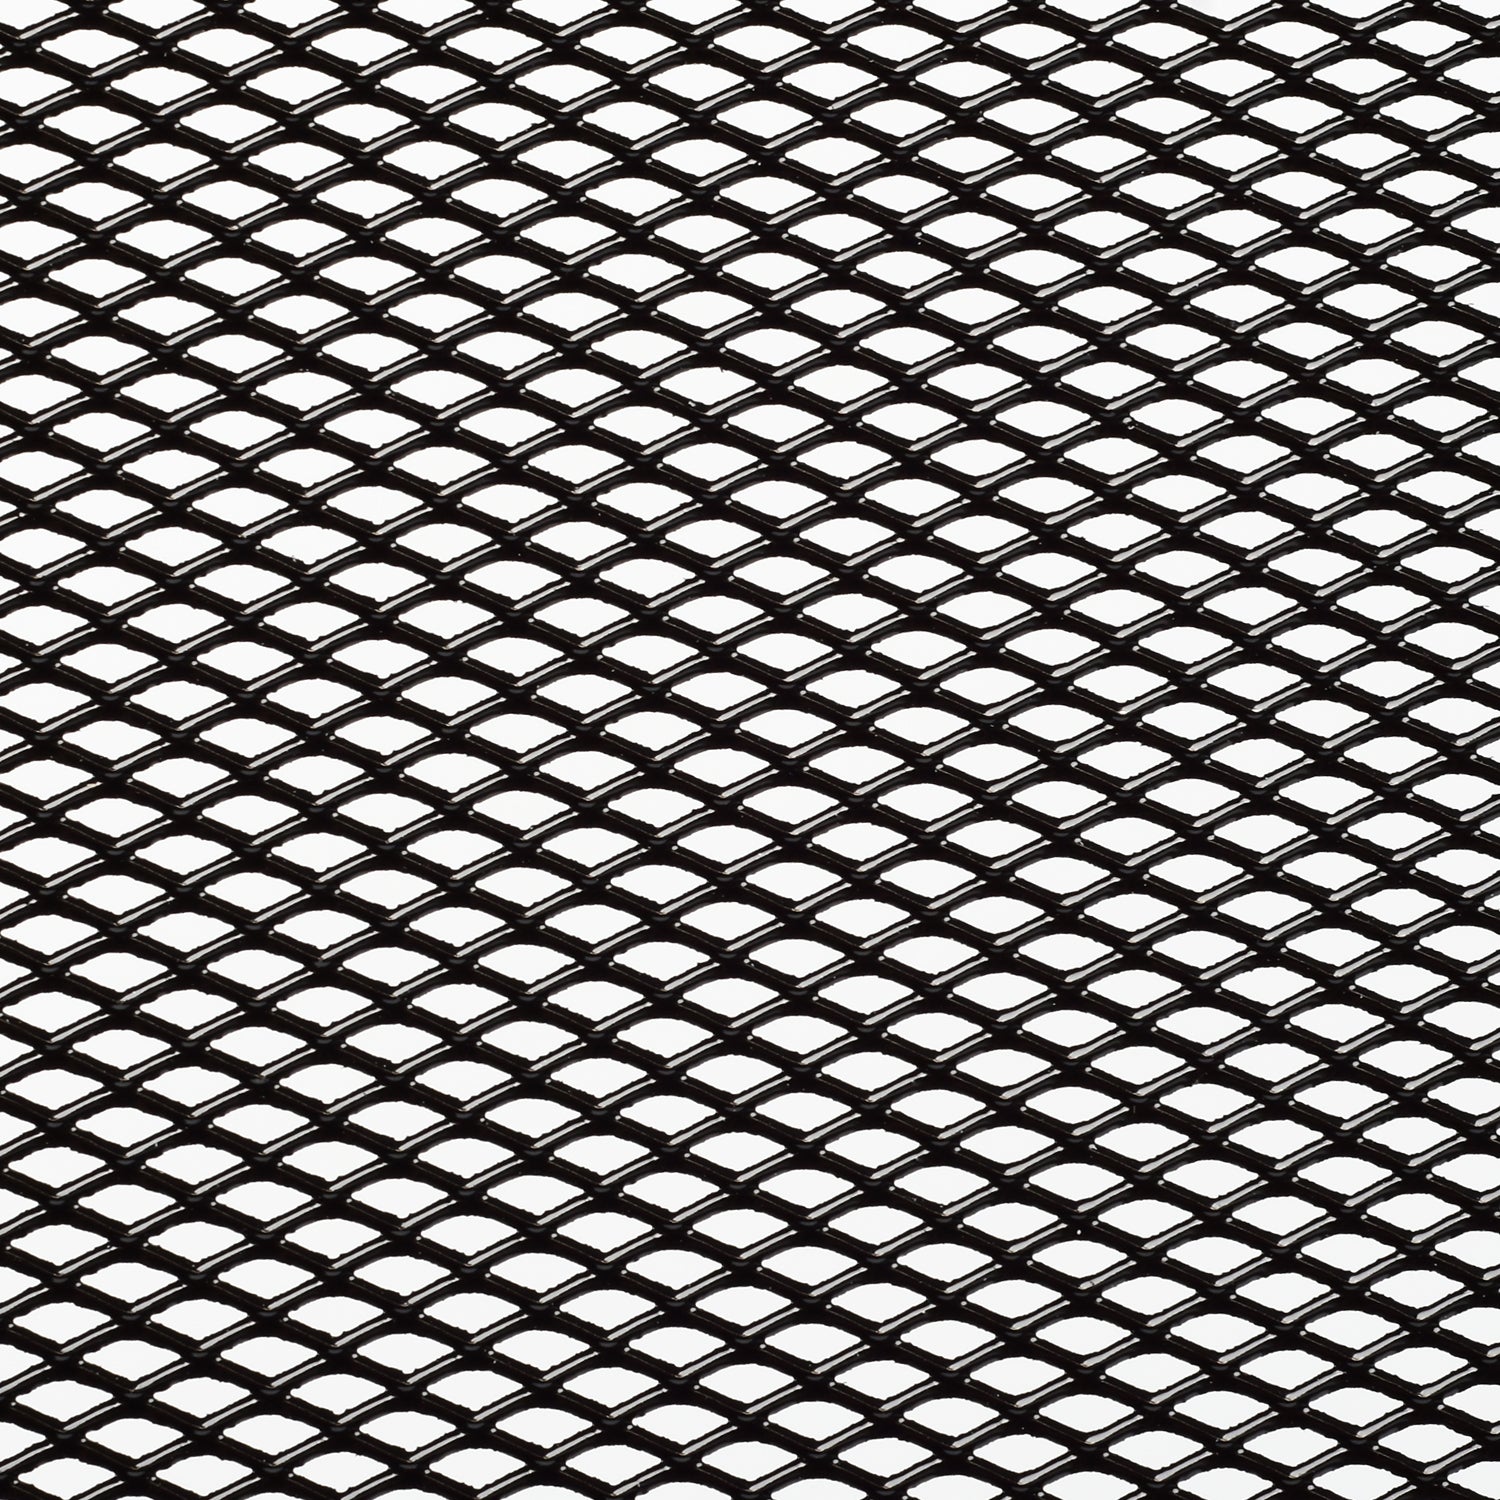  AggAuto Universal 40x13 Car Grill Mesh - 100x33cm Aluminum  Alloy Automotive Grille Insert Bumper 3x6mm Rhombic Hole, One of the Most  Multifunctional Shape Grids Black : Automotive